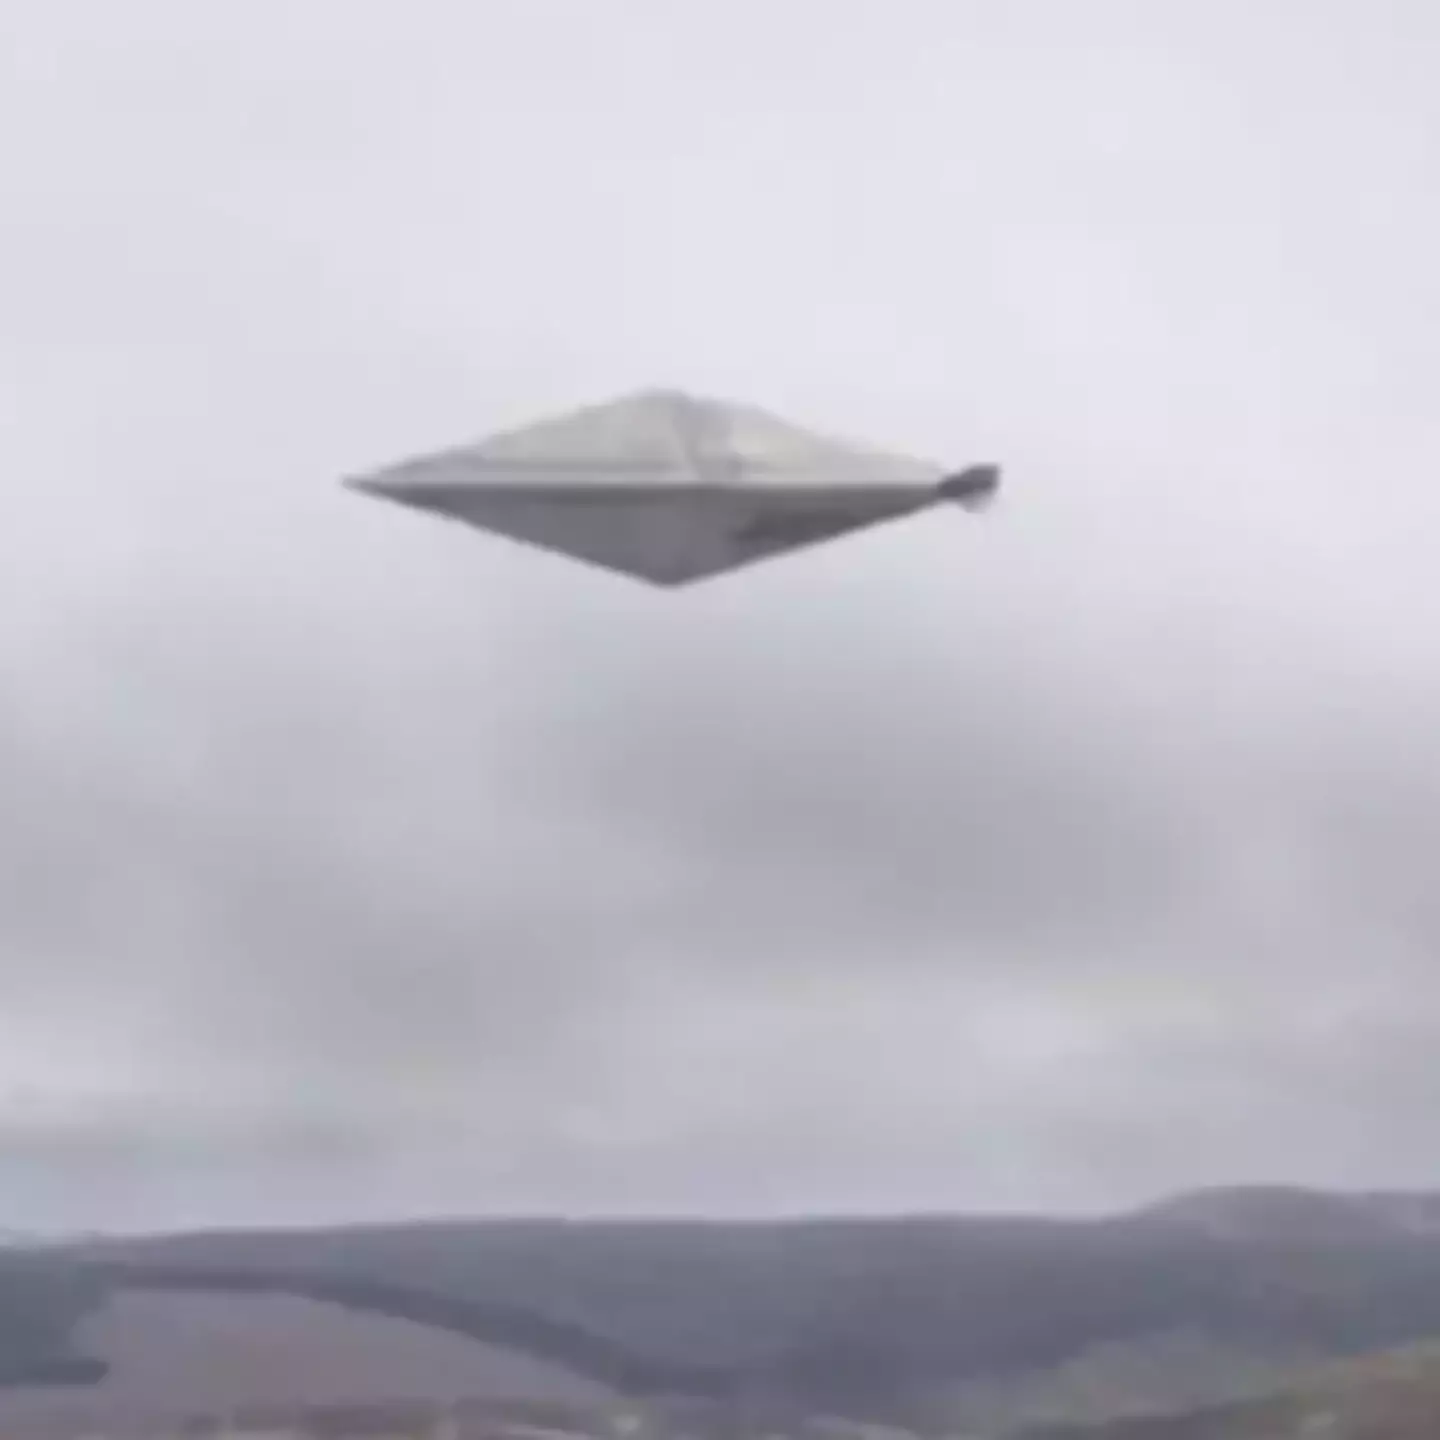 'Clearest UFO photo' ever taken was hidden from public for decades